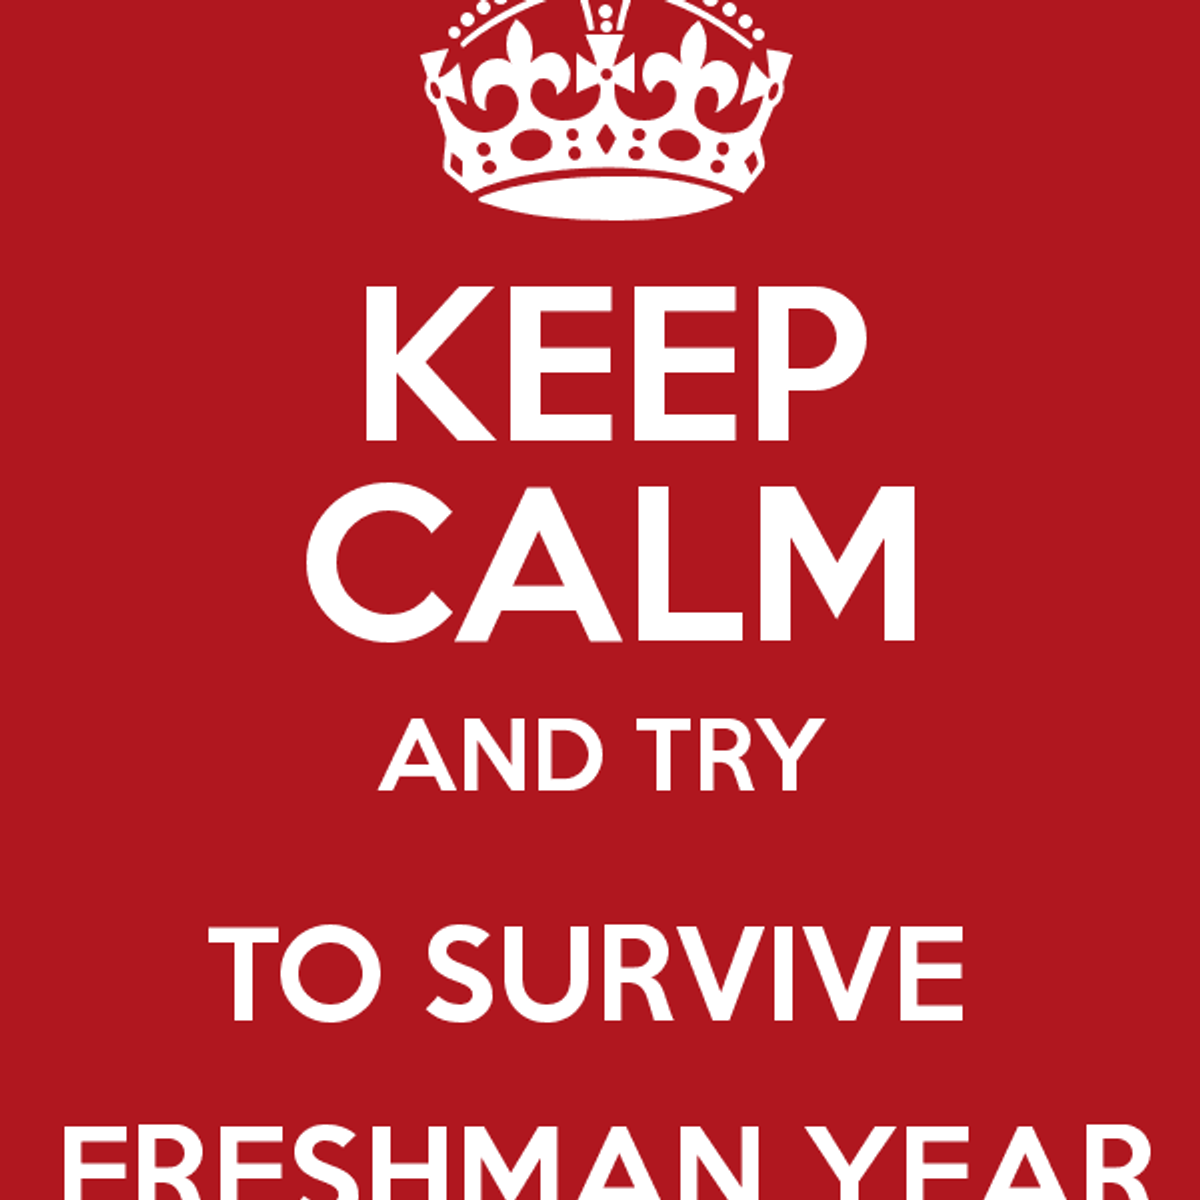 An Open Letter to Incoming Freshmen